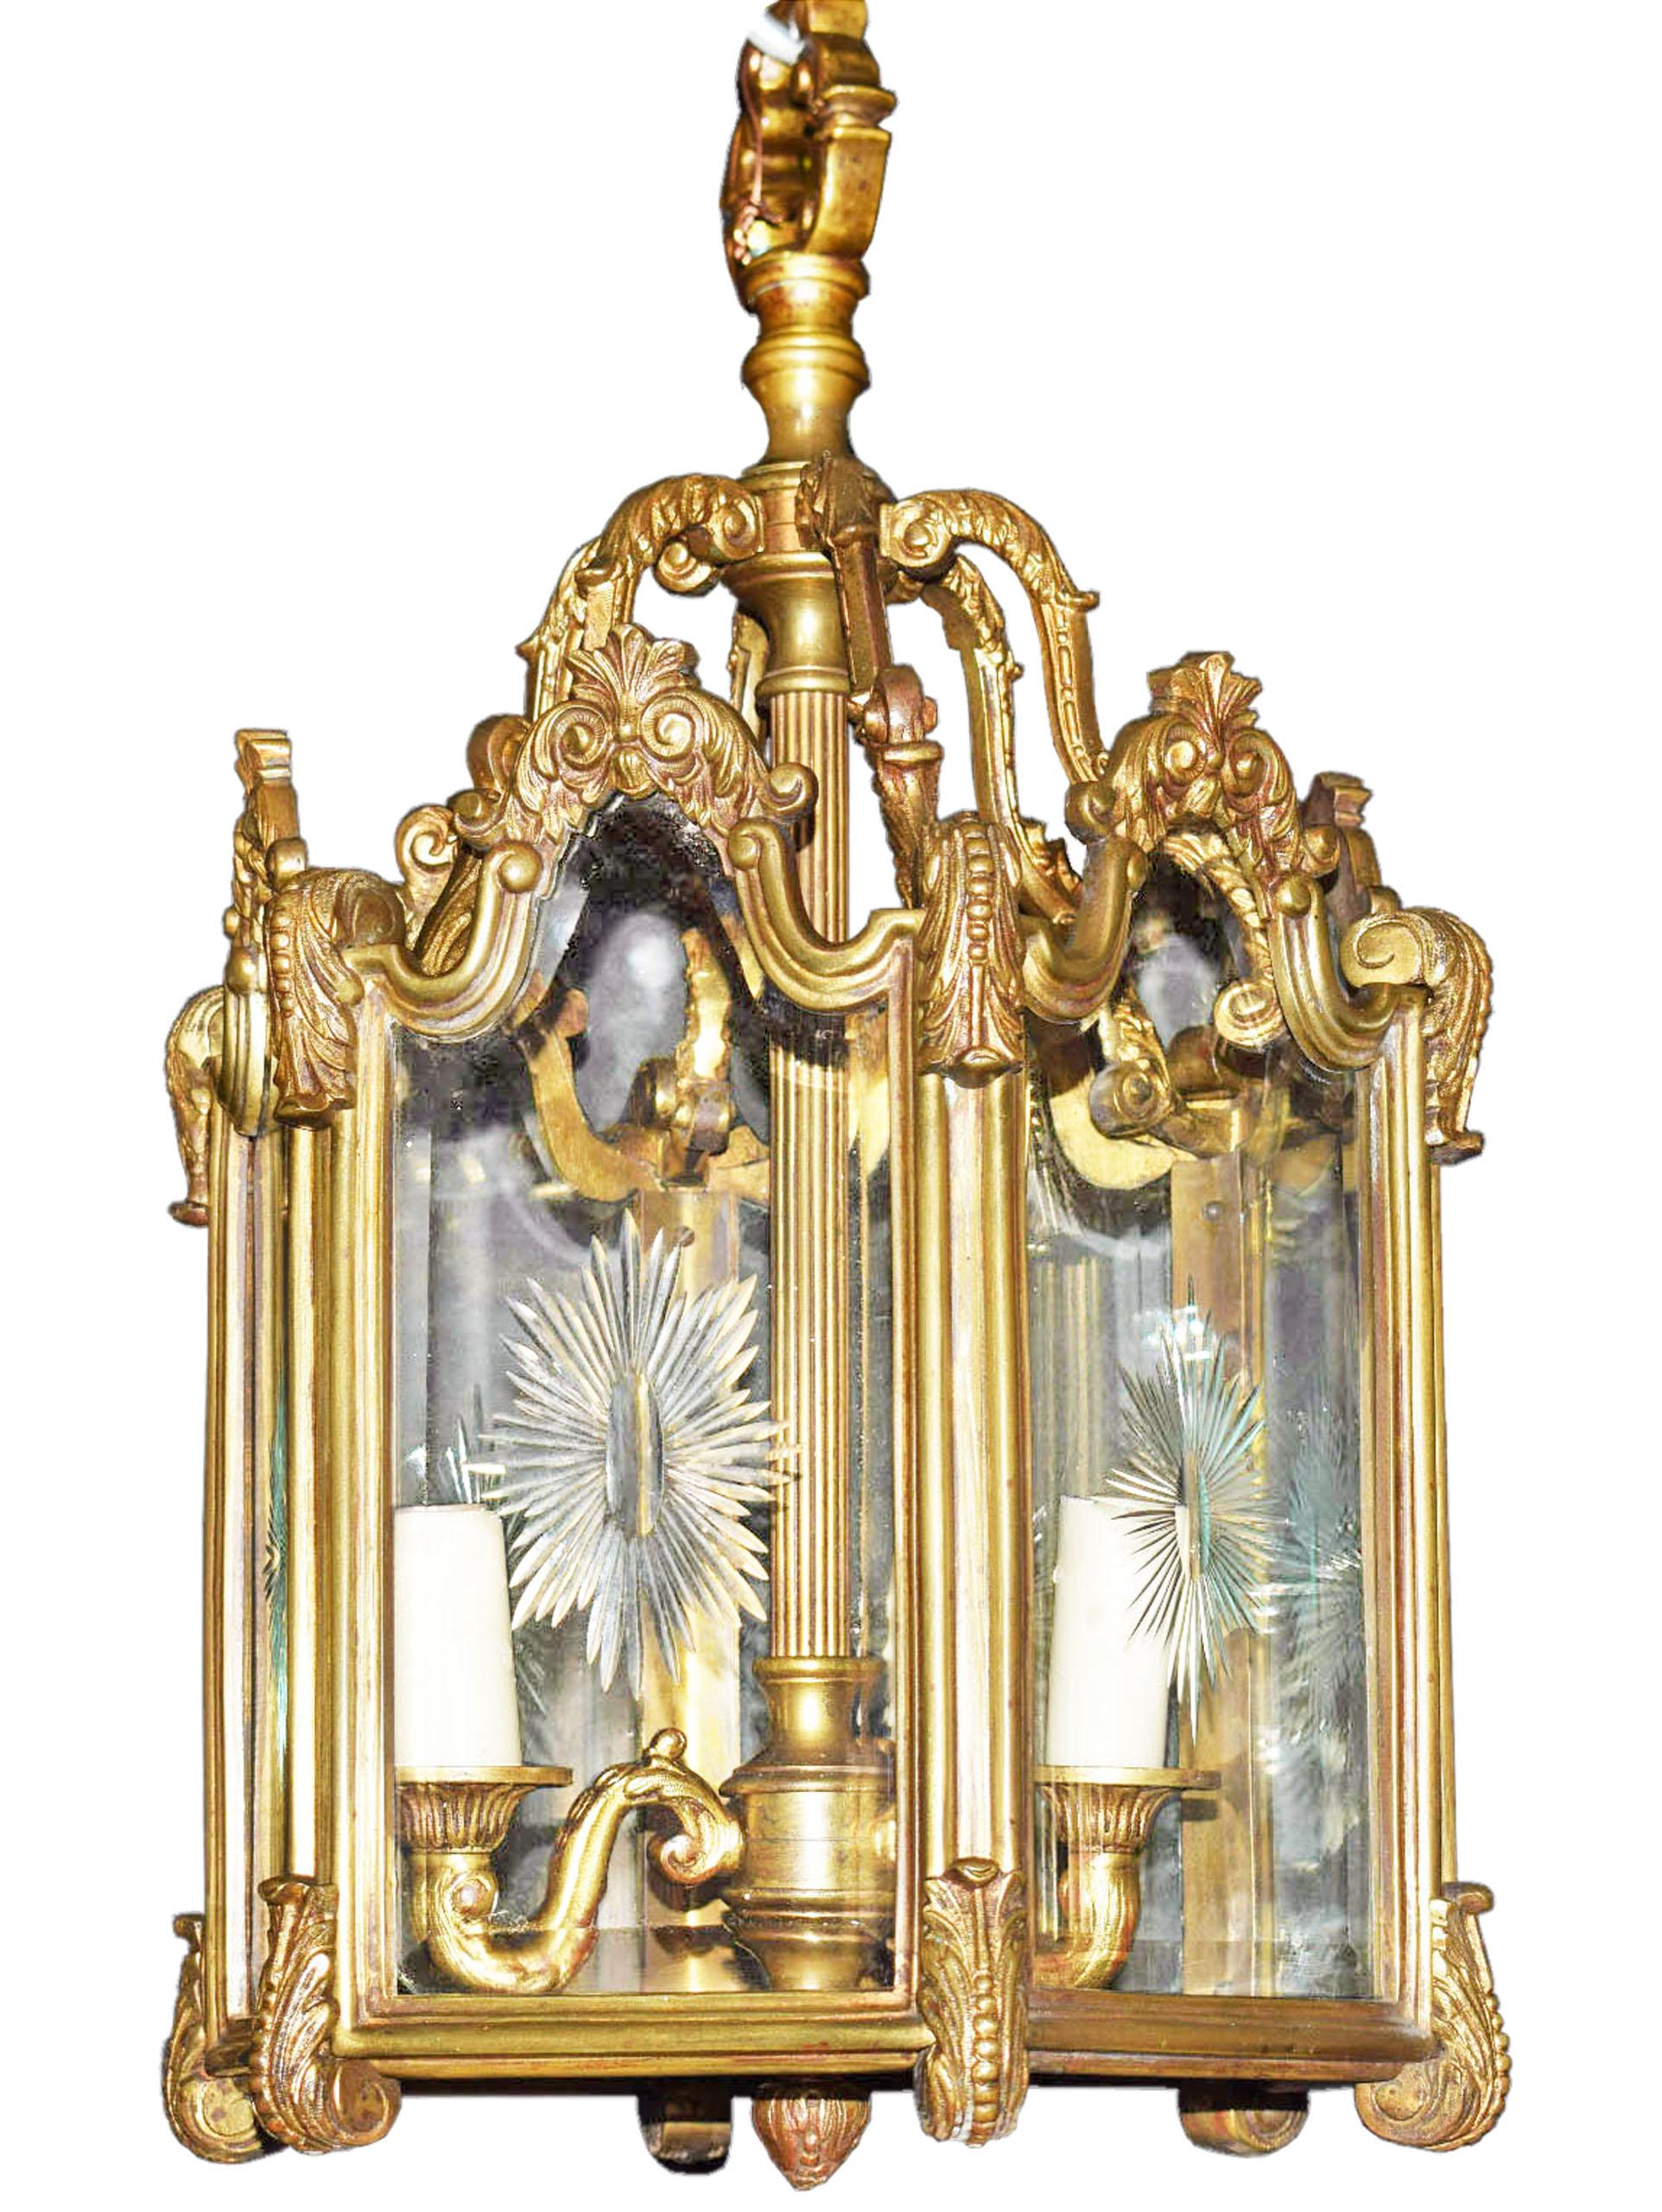 Pair of gilt bronze and crystal lanterns. Hexagonal form. Etched glass panels.
France, circa 1920. Three lights. Could be sold individually.
Dimensions: Height 20